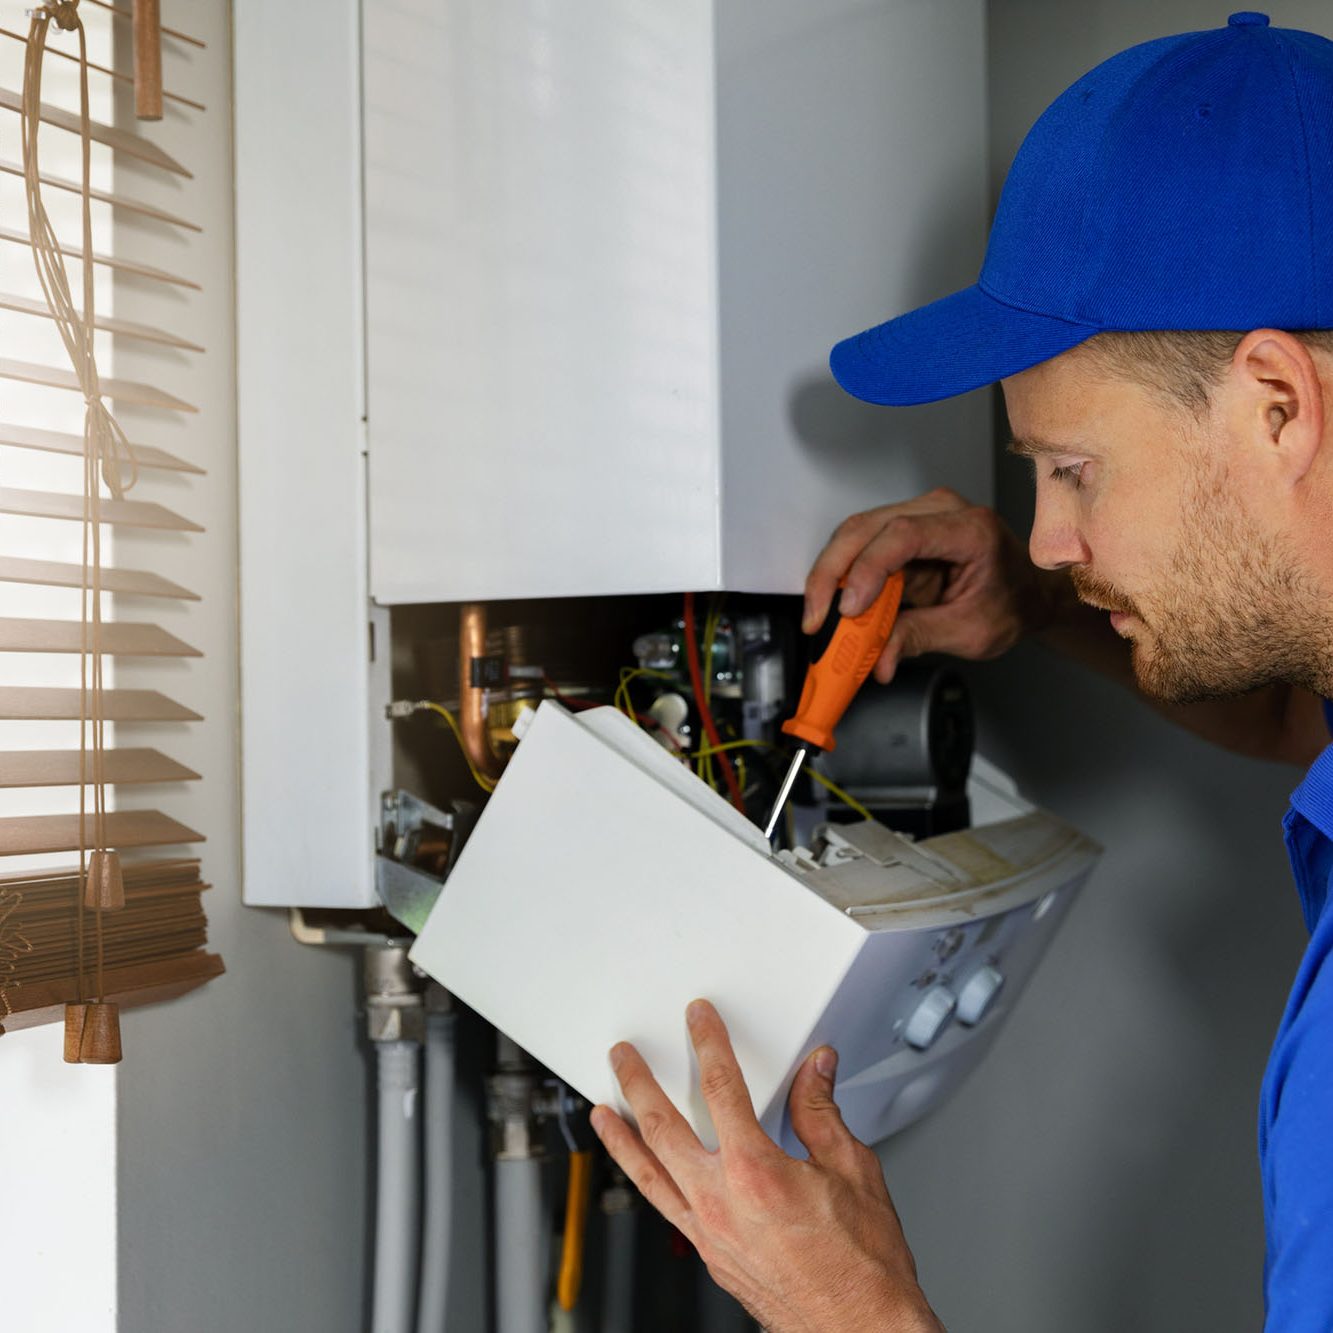 House gas heating boiler maintenance and repair service. worker in blue uniform